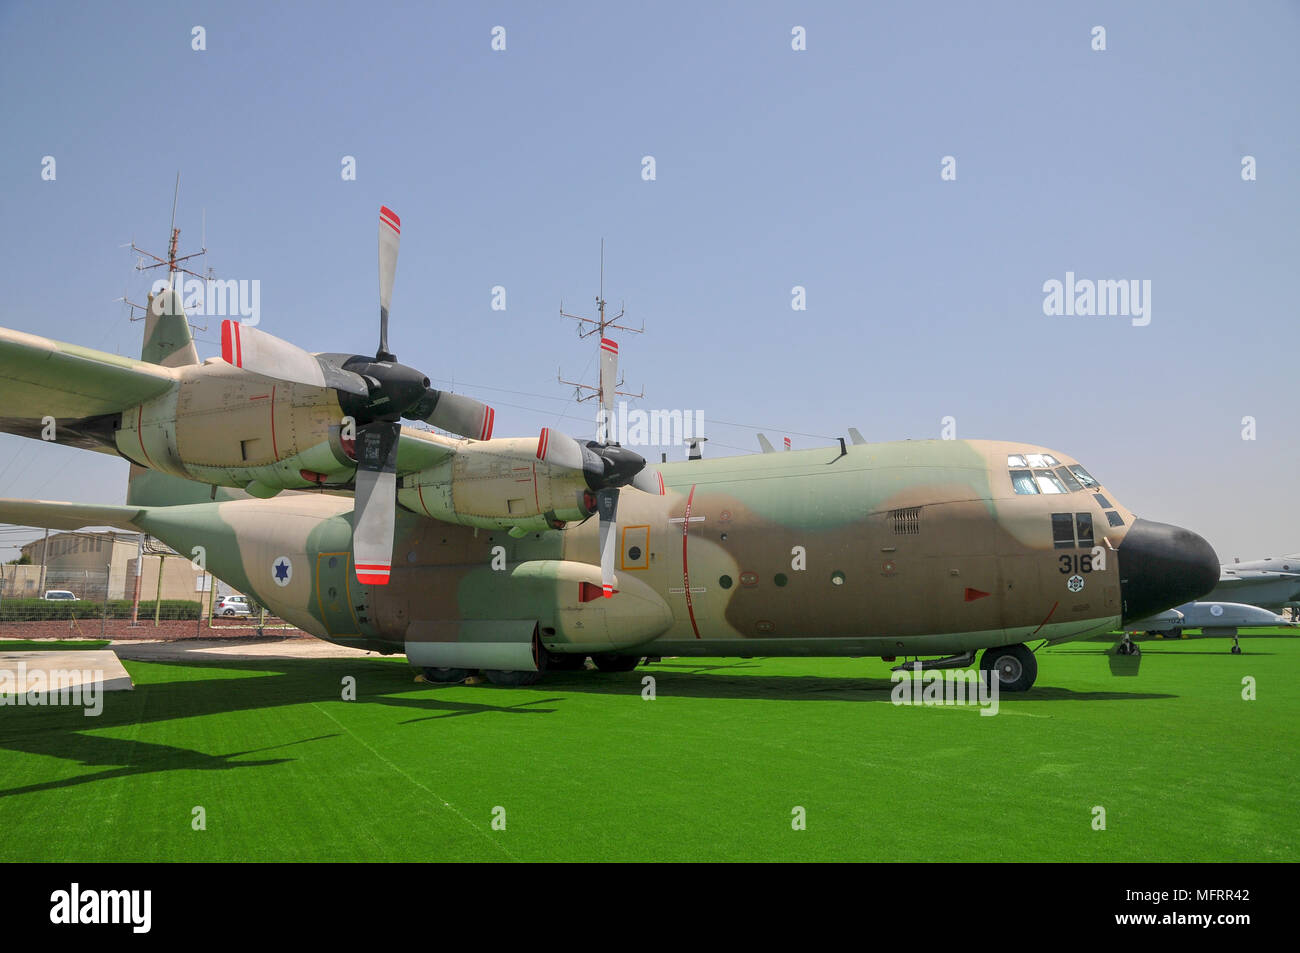 An Israeli Air Force Iaf Exhibition C 130 Hercules 100 Transport Plane On The Ground Stock Photo Alamy